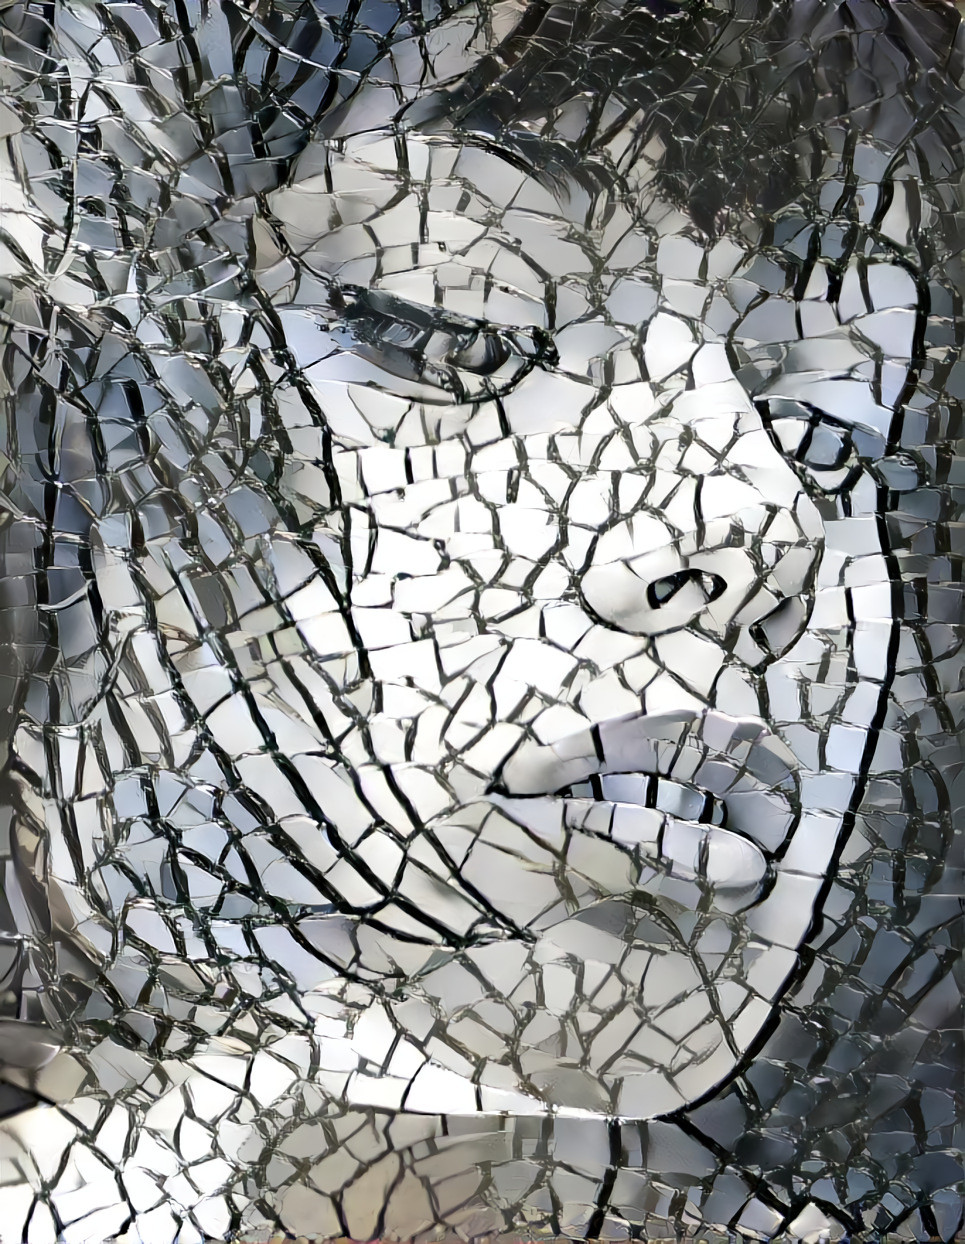 Women’s Face, Shattered Mirror